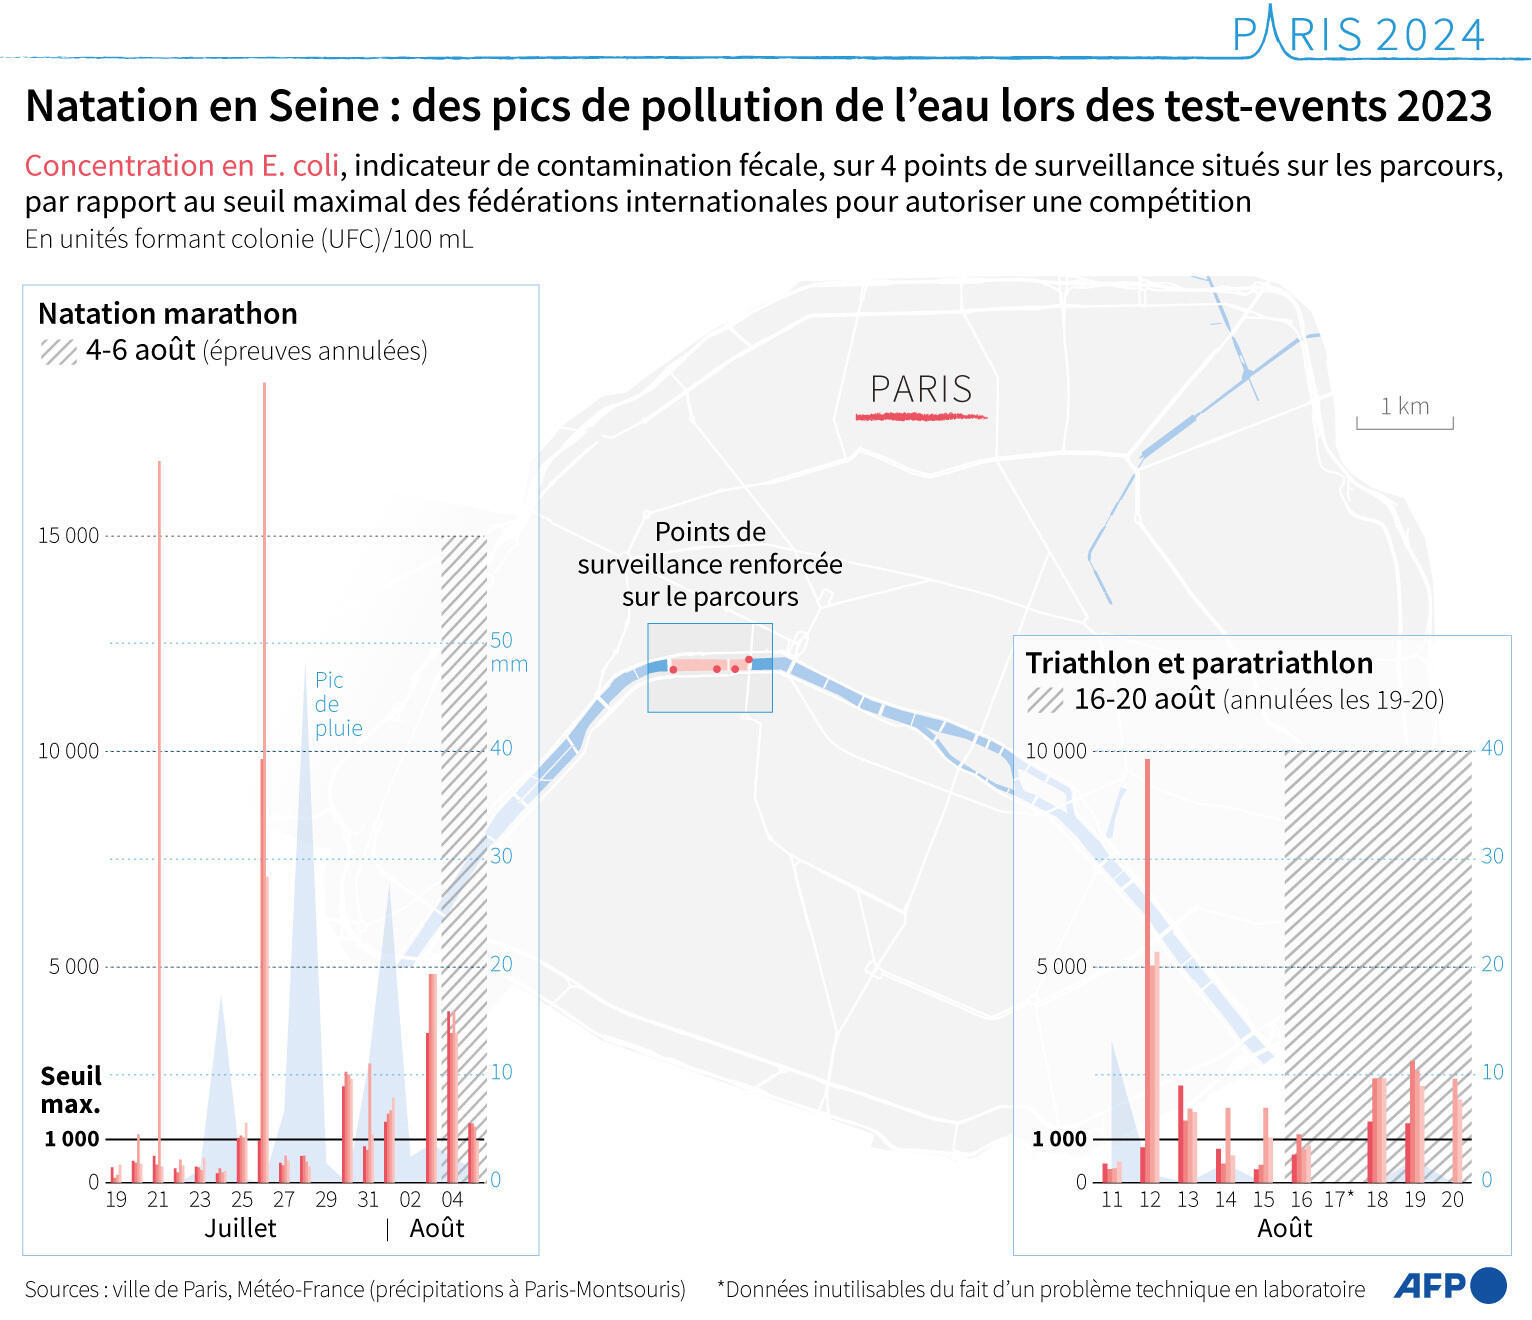 Swimming in the Seine: peaks in water pollution during 2023 test events